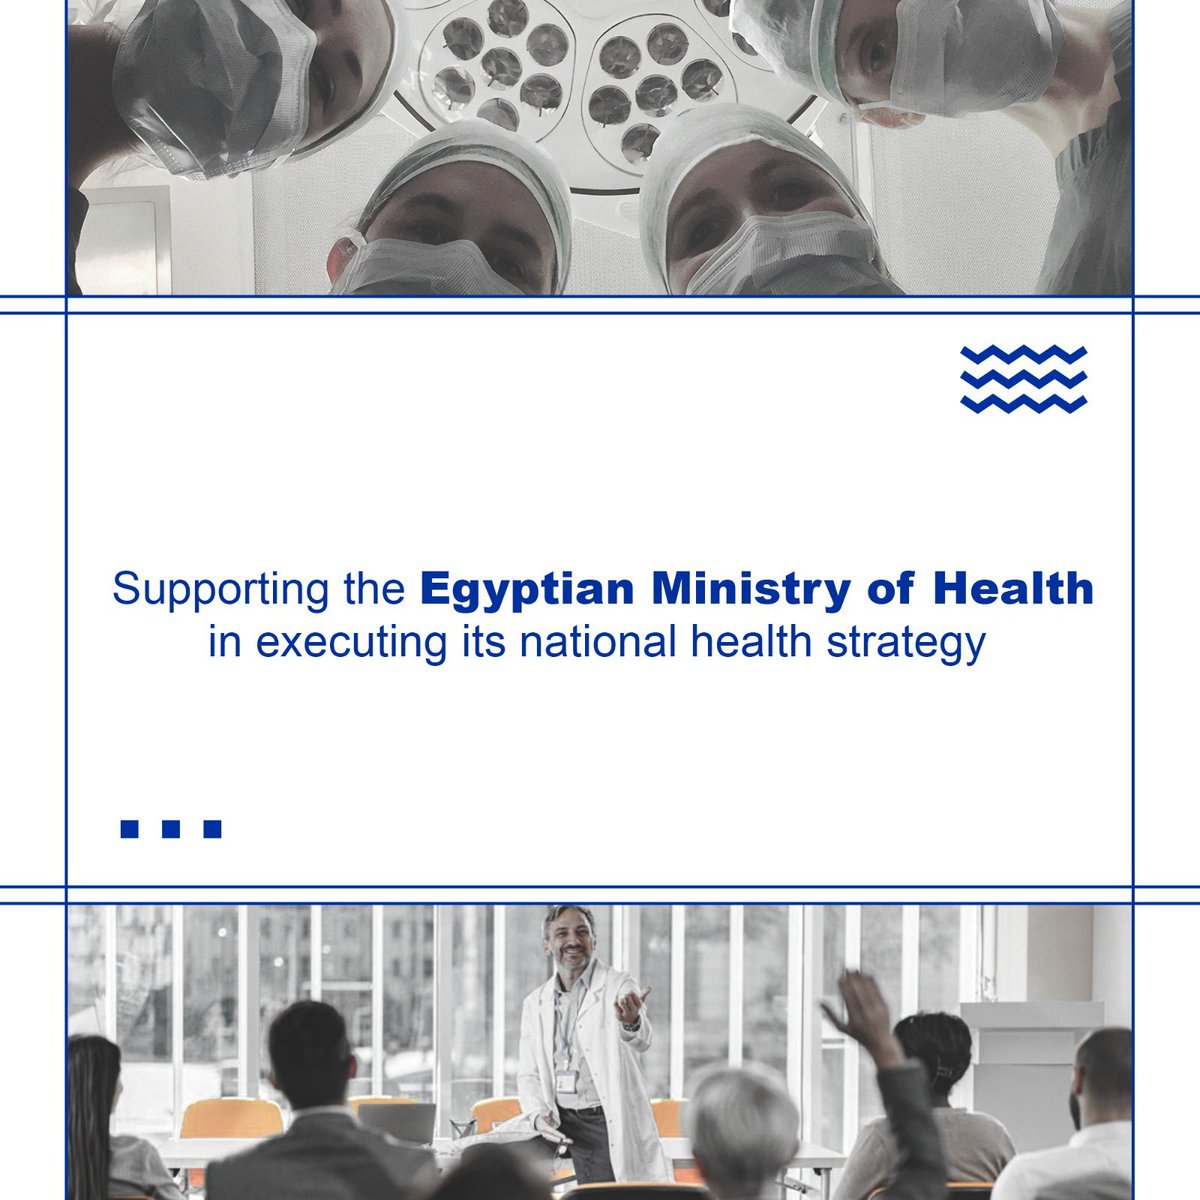 Enhancing healthcare service quality ranks among the European Union’s foremost priorities in Egypt. On World Health Day, we highlight the EU’s efforts to support Egypt’s healthcare sector. #worldhealthday #theeuropeanunion #euinegypt